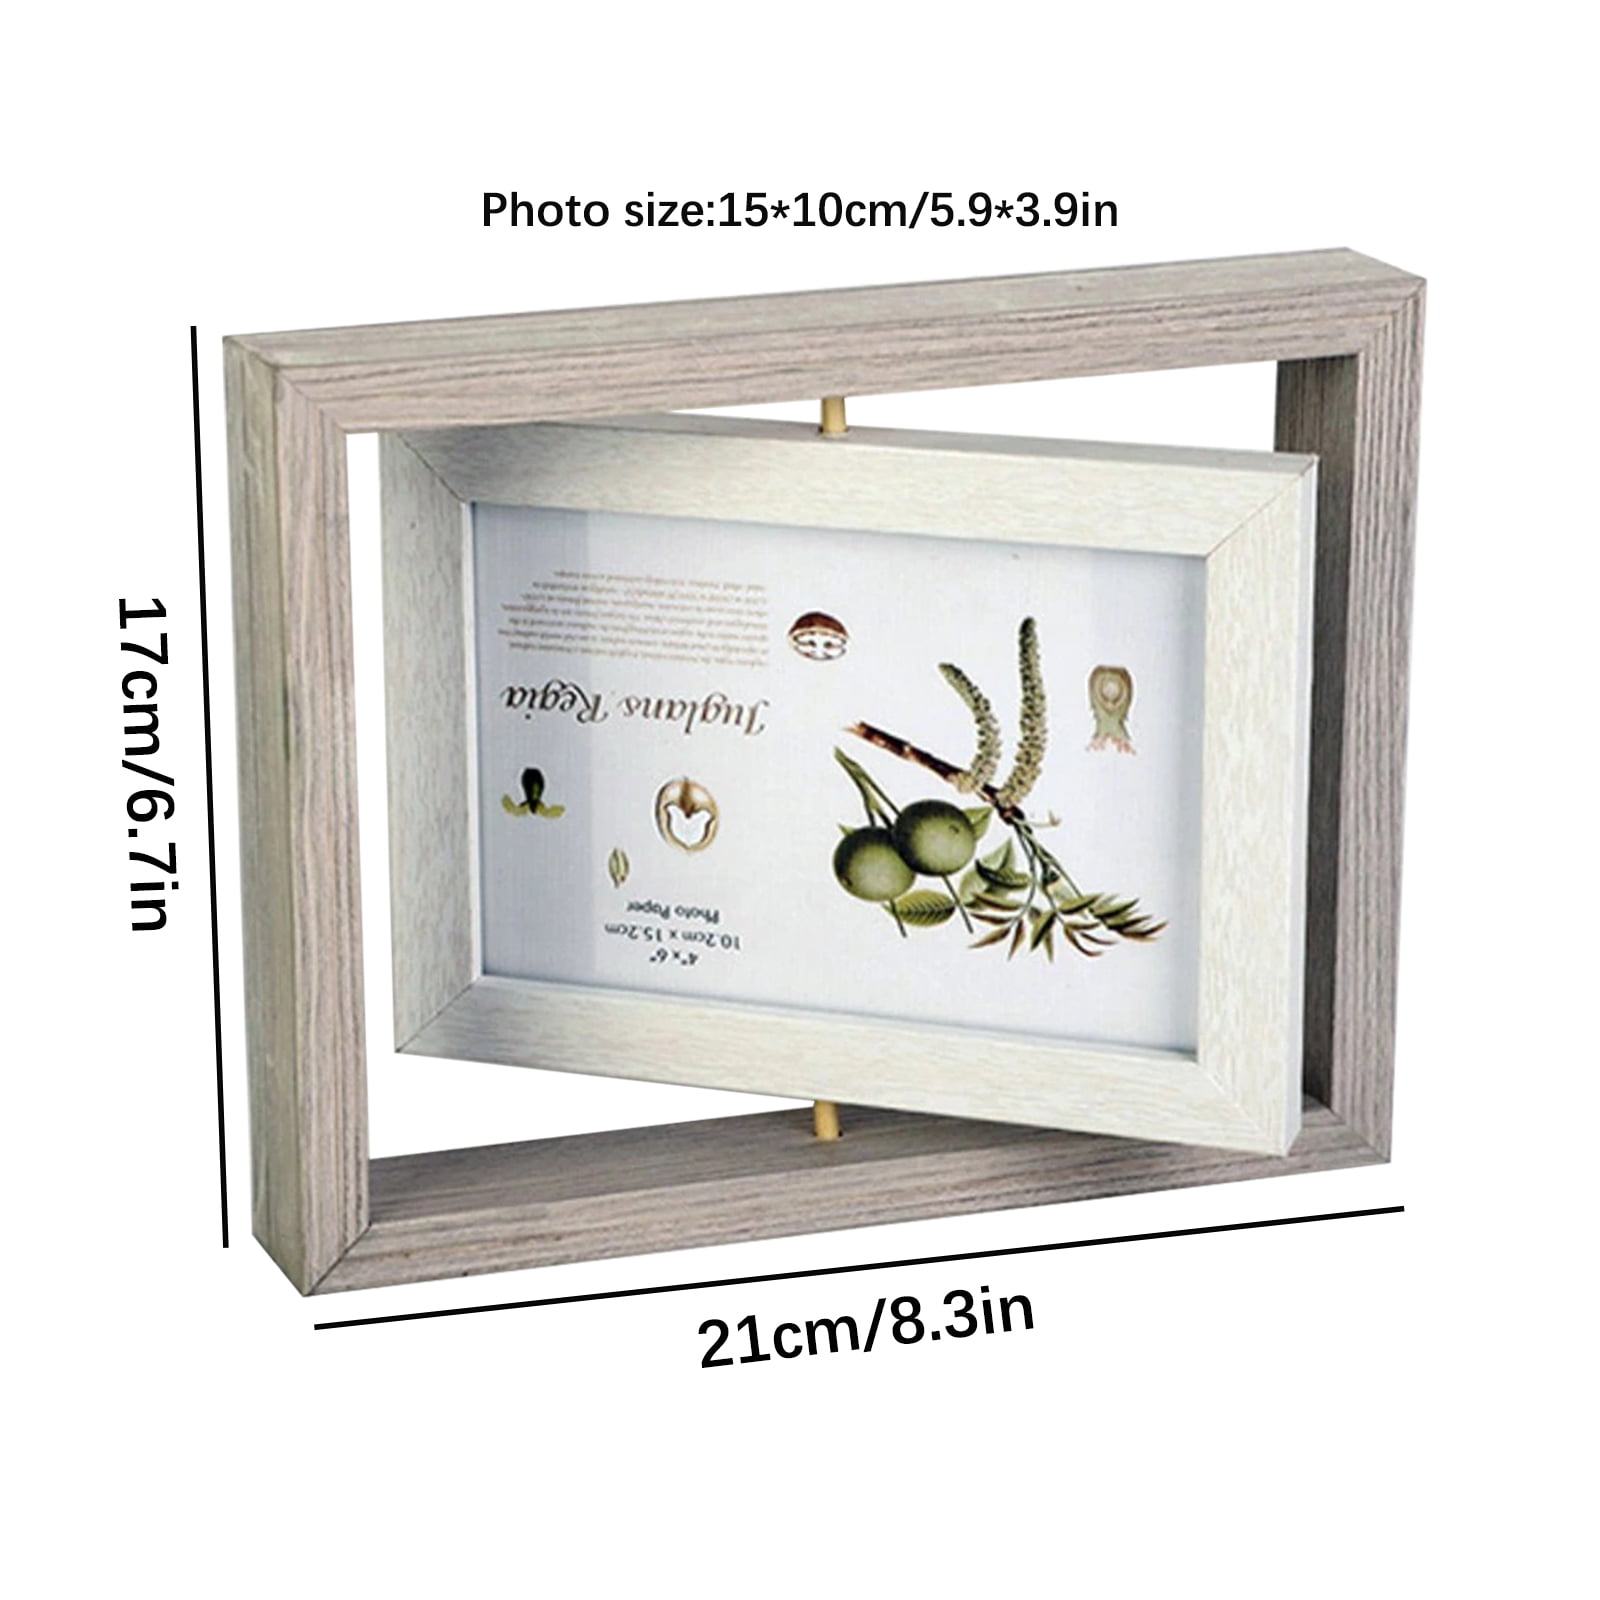 TWING Table Sign Display Holder Slant Ad Photo Frame Brochure Holder Clear Acrylic 8.5x11inches Pack of 3 